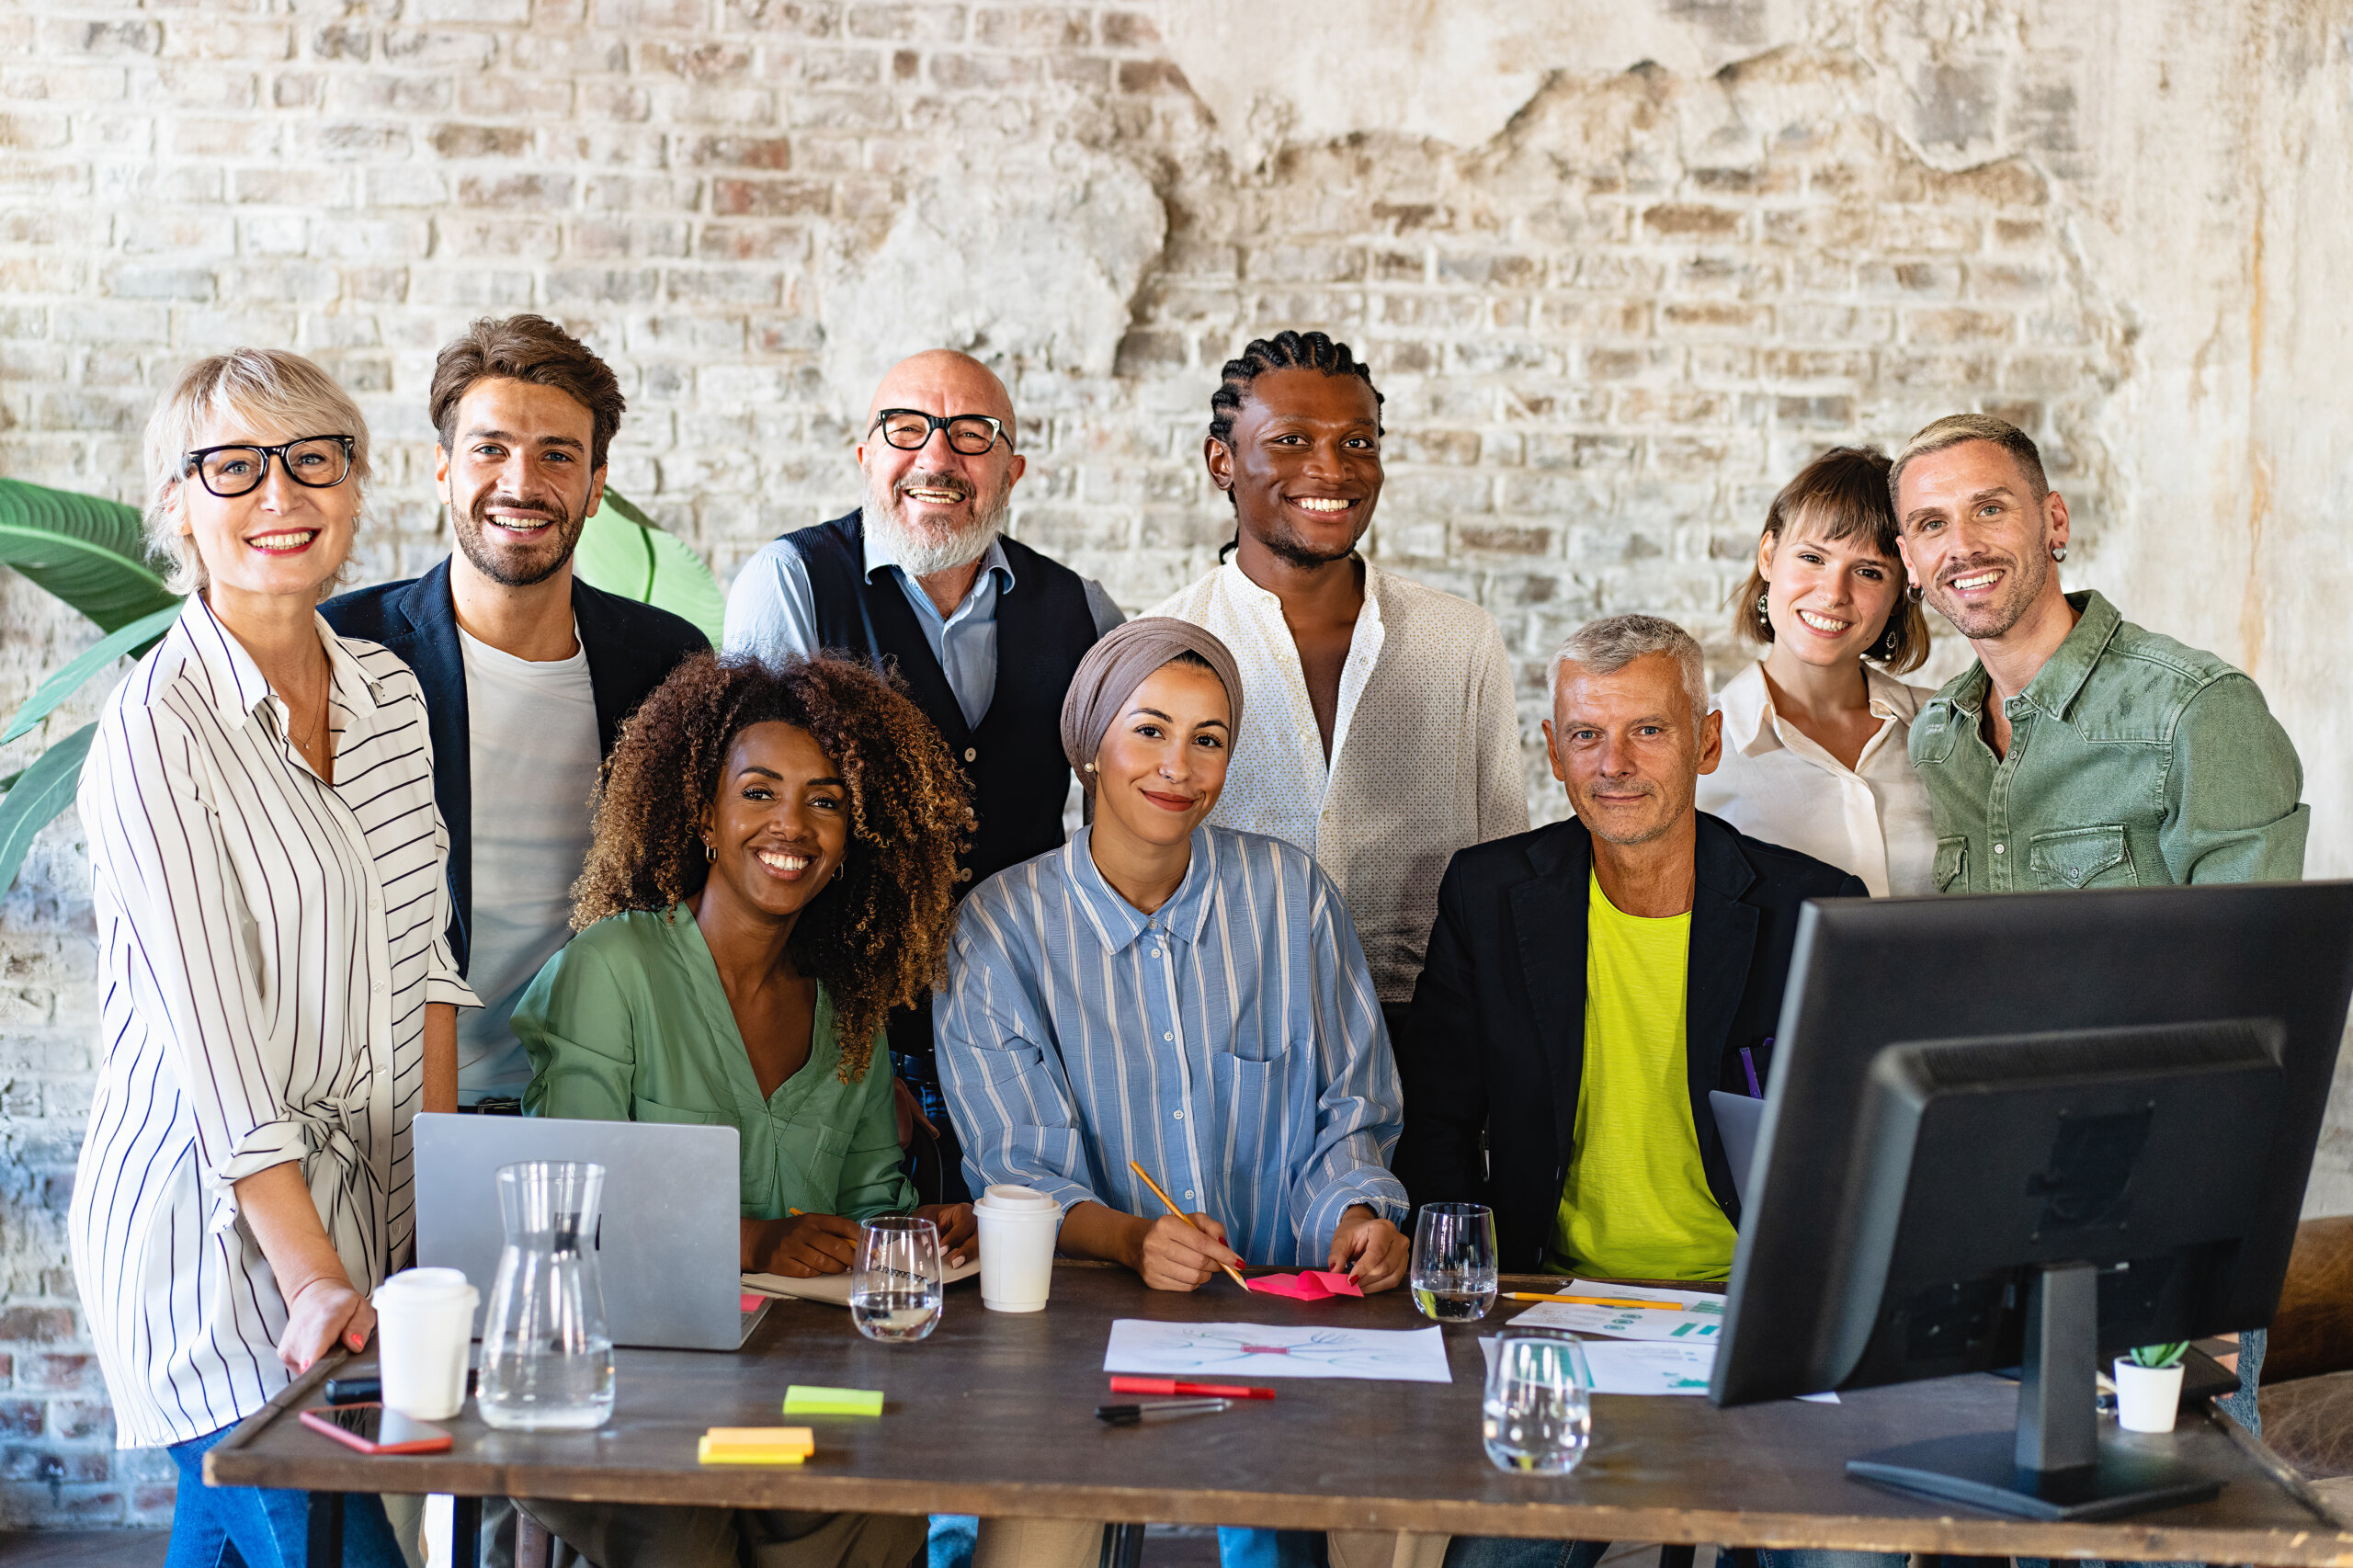 Portrait of successful group of multiethnic business people at modern office looking at camera. Portrait of happy creative team of satisfied businesspeople standing as a team. Multiracial group of people smiling.